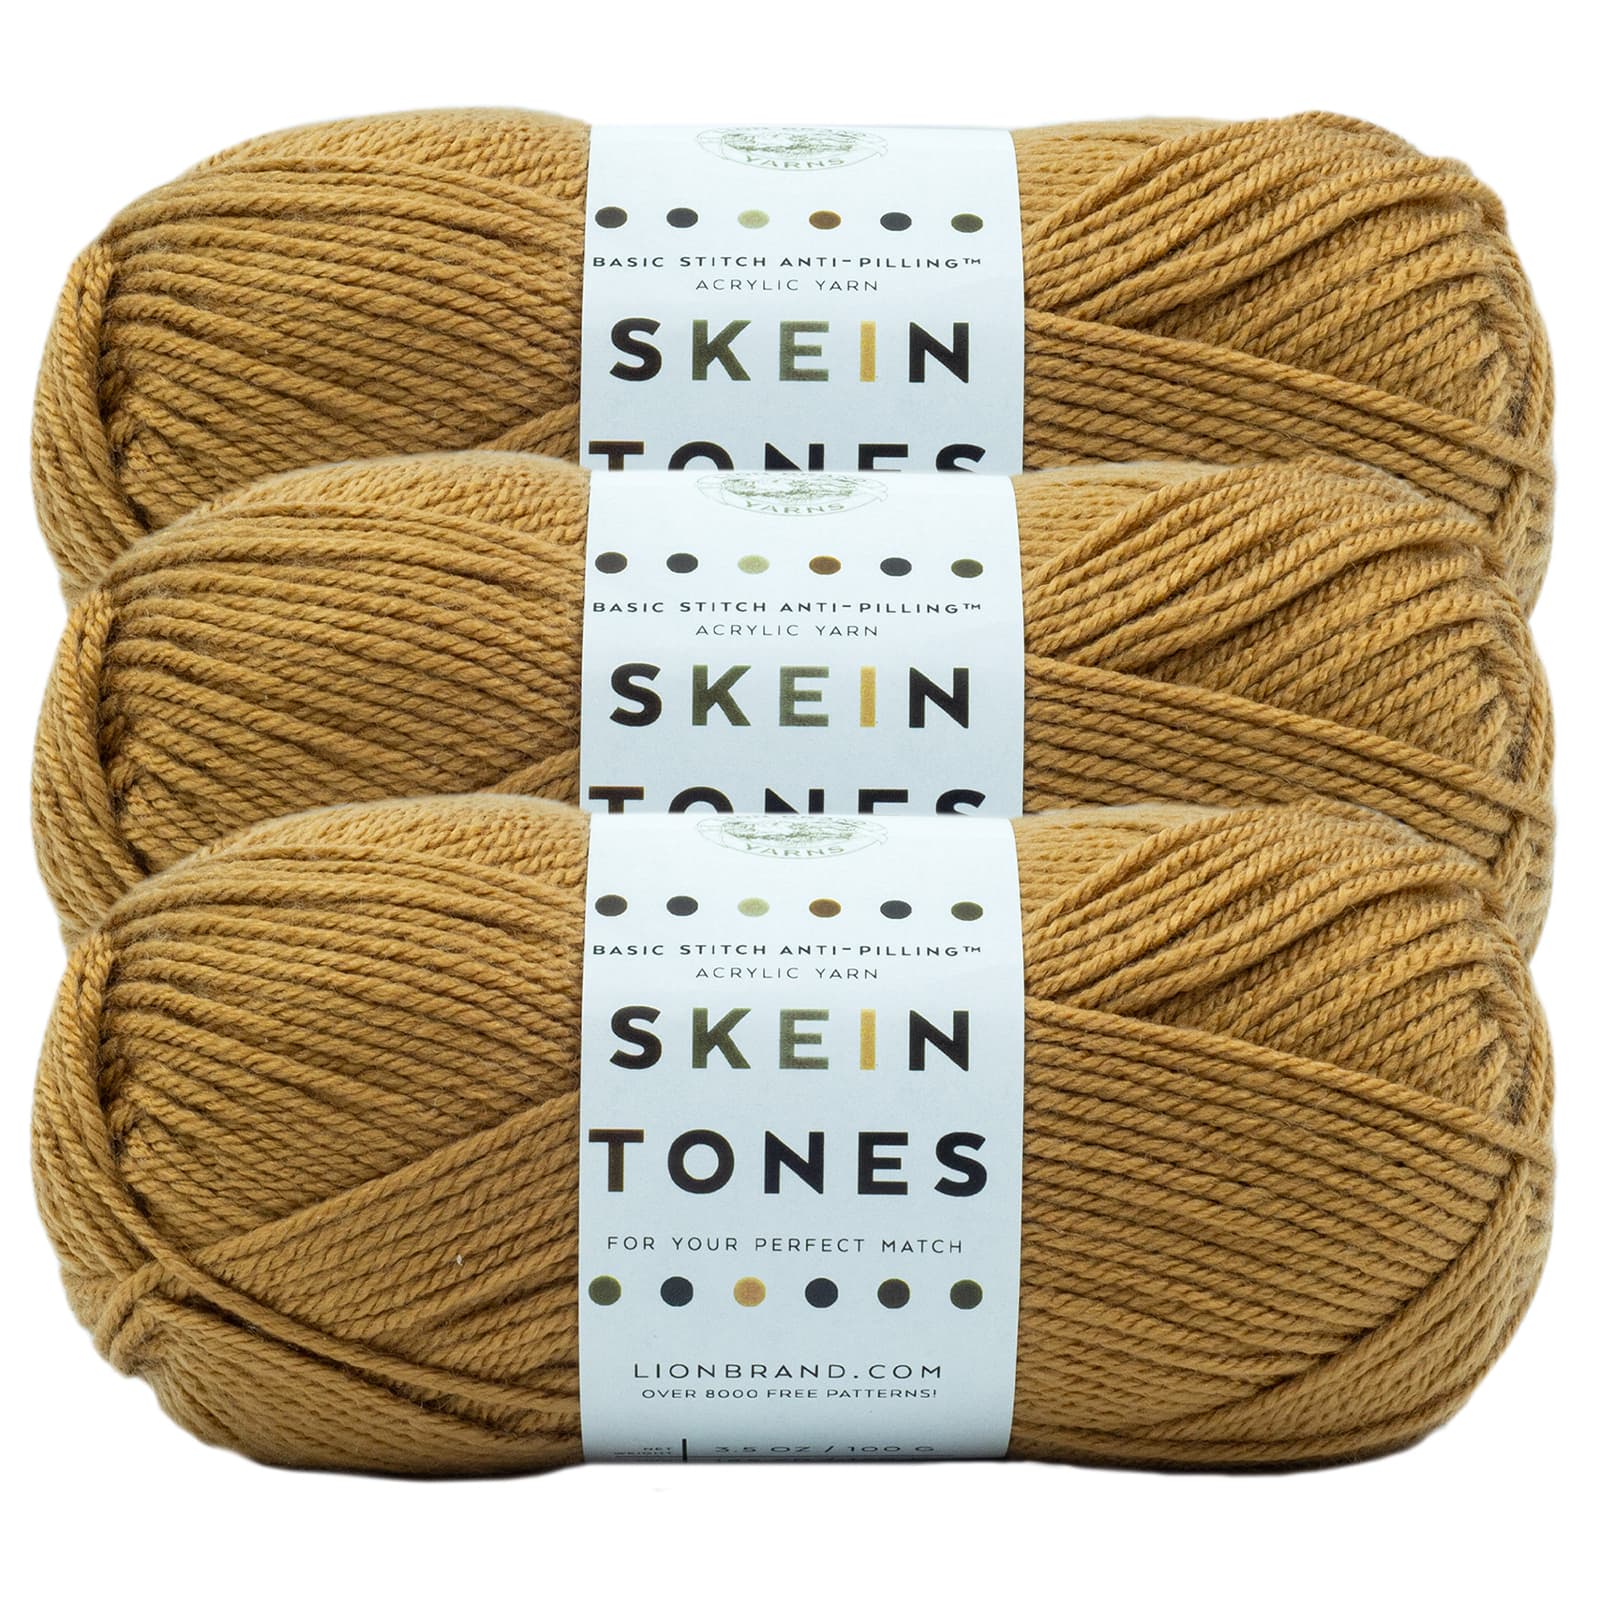 1 Skein 8 Skeins Available From 2 Colors Lion Brand Jiffy Yarn, Mohair-look  Yarn, Machine Wash/dry -  New Zealand